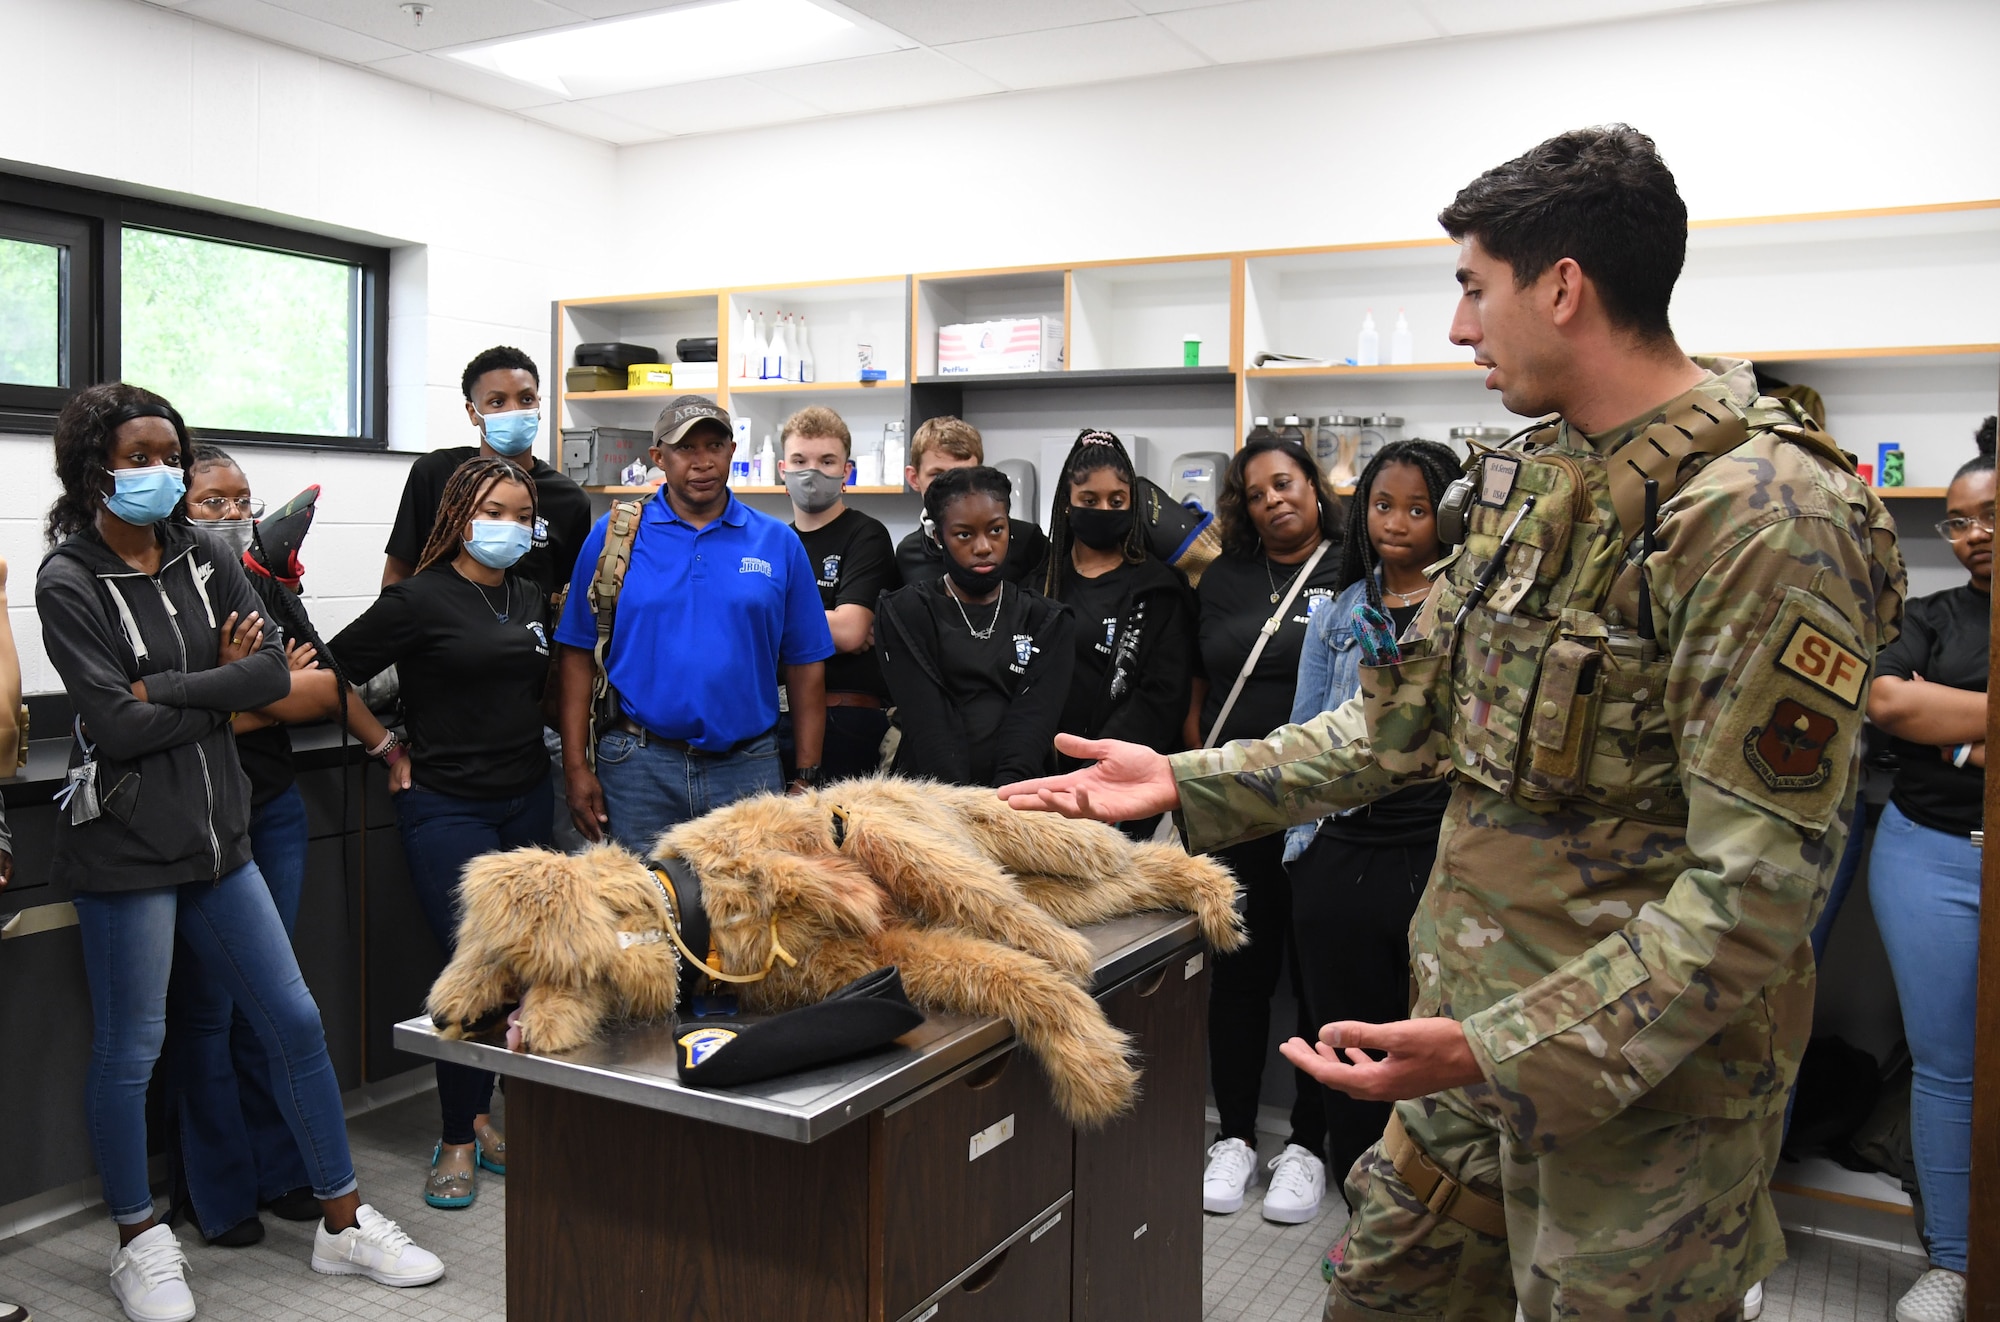 U.S. Air Force Senior Airman Anthony Seretis, 81st Security Forces Squadron military working dog handler, delivers a military working dog brief to Jefferson Davis County High School Junior ROTC cadets inside the kennel at Keesler Air Force Base, Mississippi, April 12, 2022. Throughout their visit to Keesler, more than 30 cadets received a Hurricane Hunters briefing, visited air traffic control training courses and received a military working dog demonstration. (U.S. Air Force photo by Kemberly Groue)